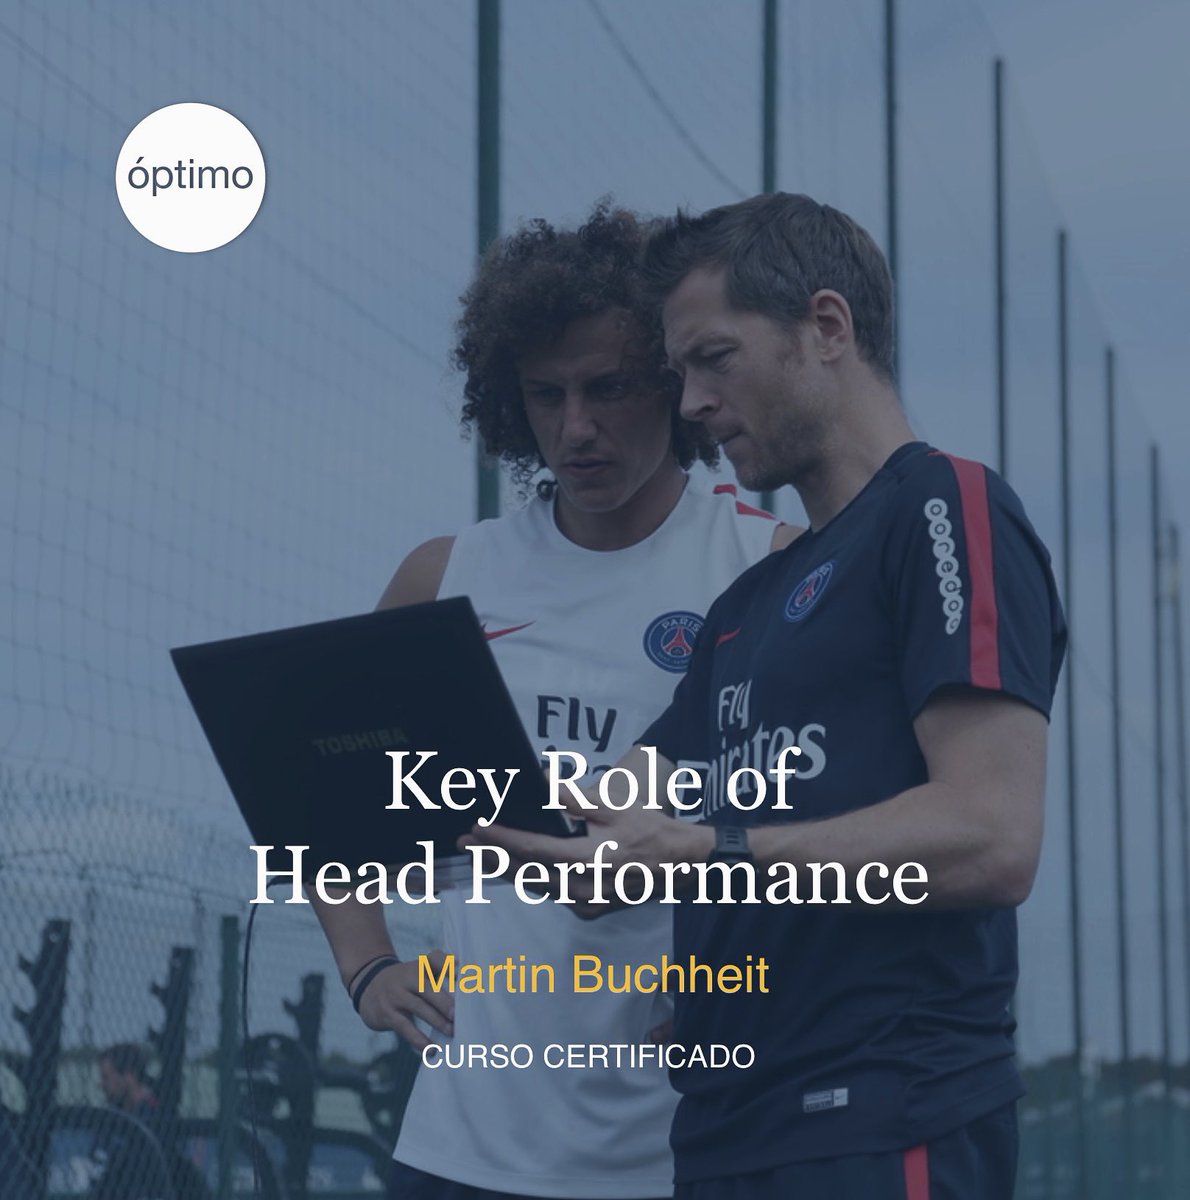 The key role of head performance - MARTIN BUCHHEIT Two days certified course for a maximum of 10 people in our Sports Performance & Medical Center, Estepona. May 10 and 11, 2024. optimosportclinic.com/event-details/… @mart1buch @IberianSportech @1080motion @statsports @ThermoHuman